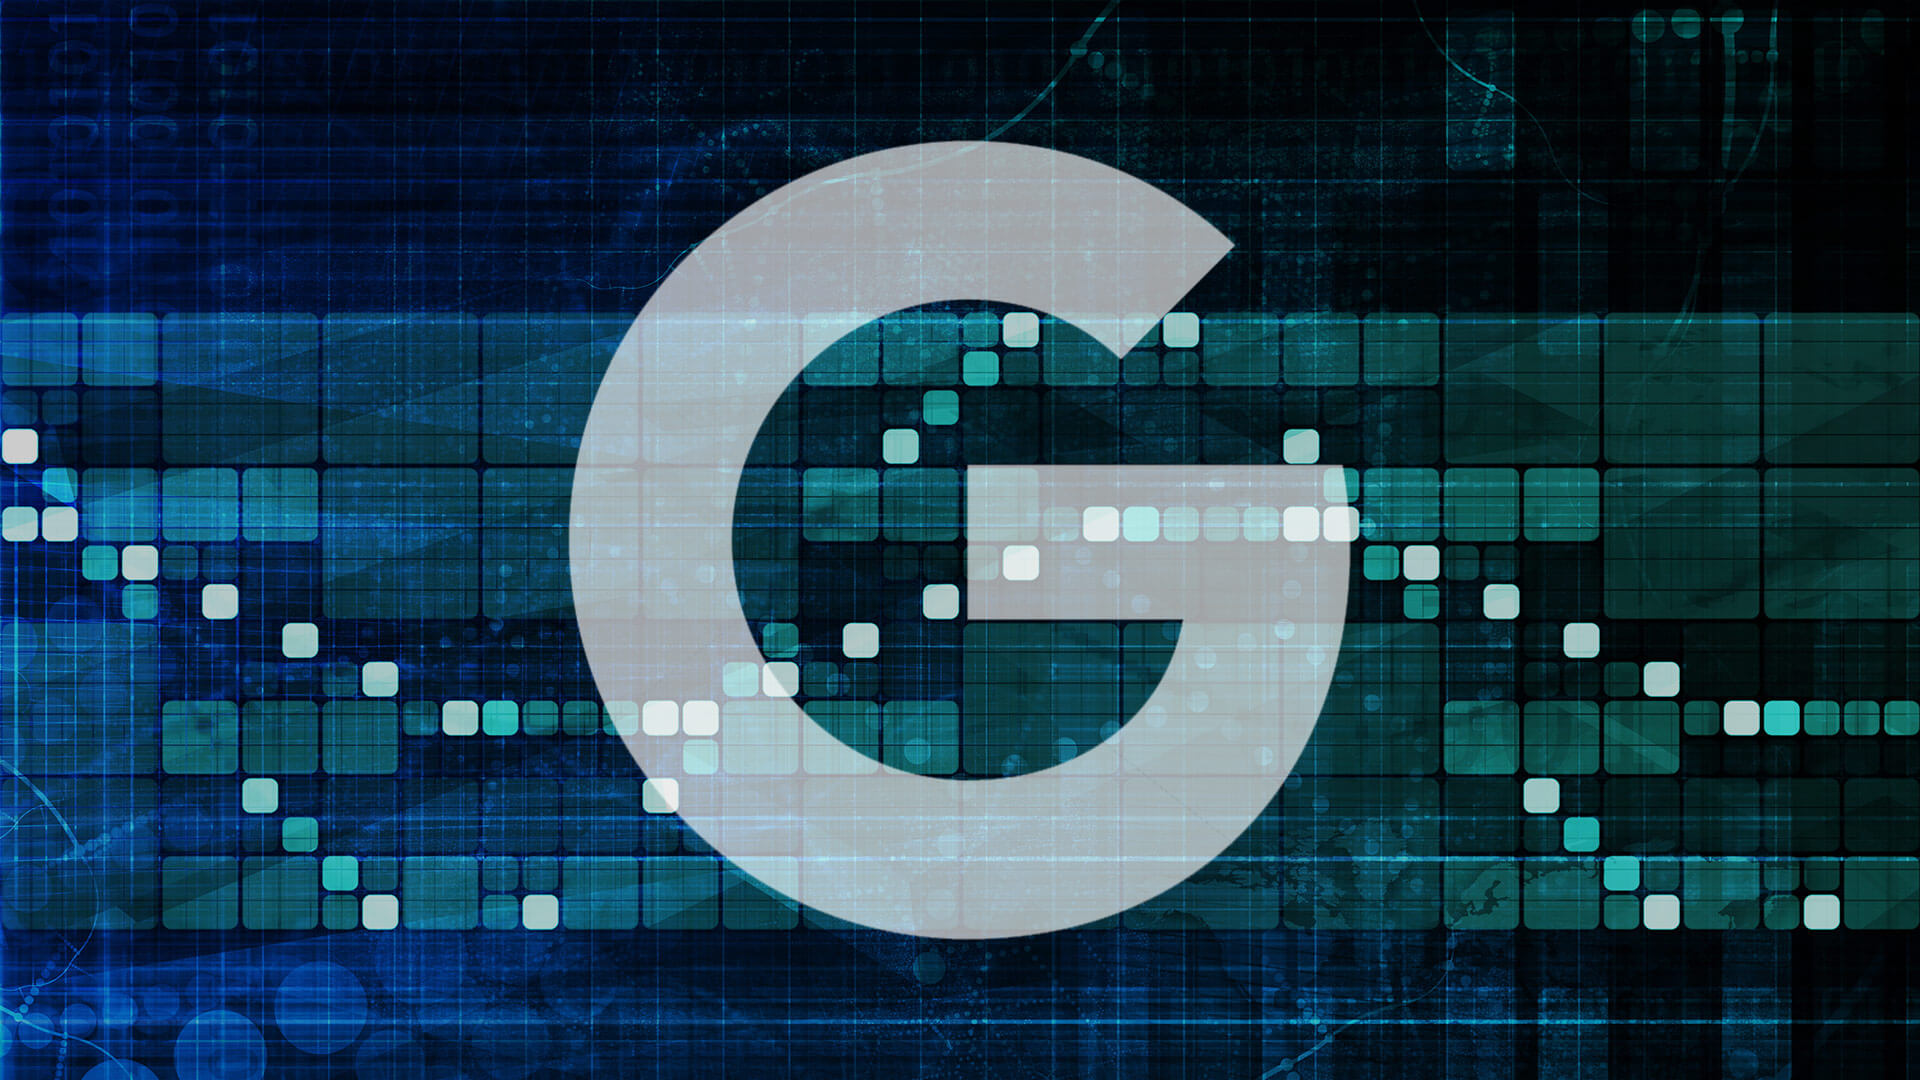 Google: De-indexing issue now fixed, result of “technical issues”